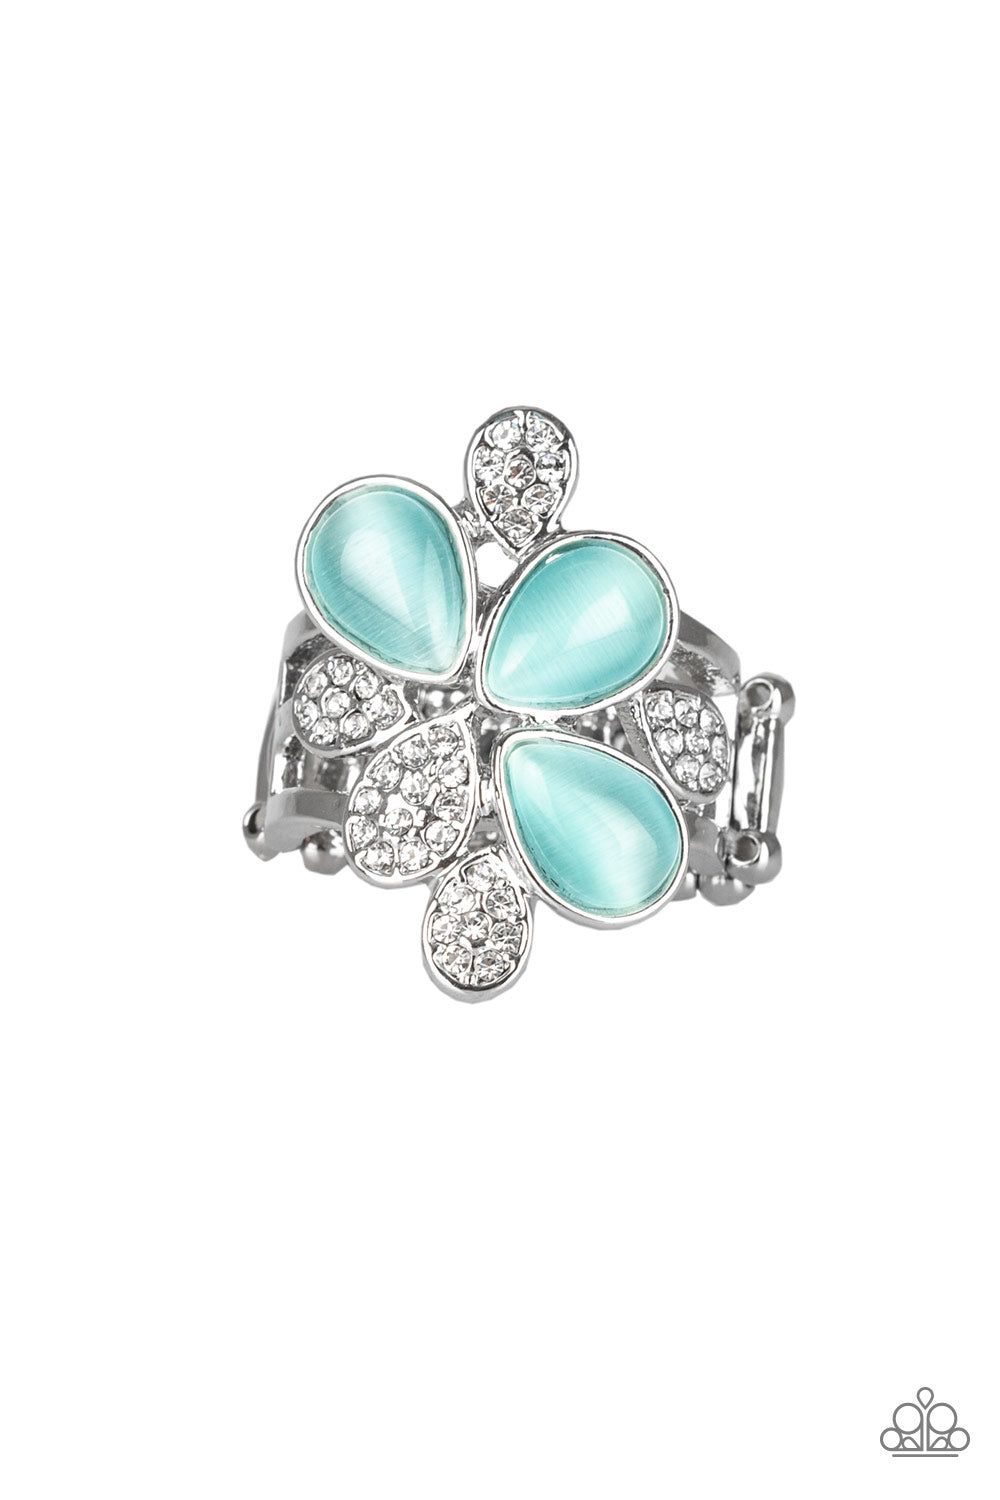 Featuring tranquil teardrop shapes, glowing blue moonstones and white rhinestone encrusted petals coalesce into an enchanting band for a seasonal look. Features a stretchy band for a flexible fit.